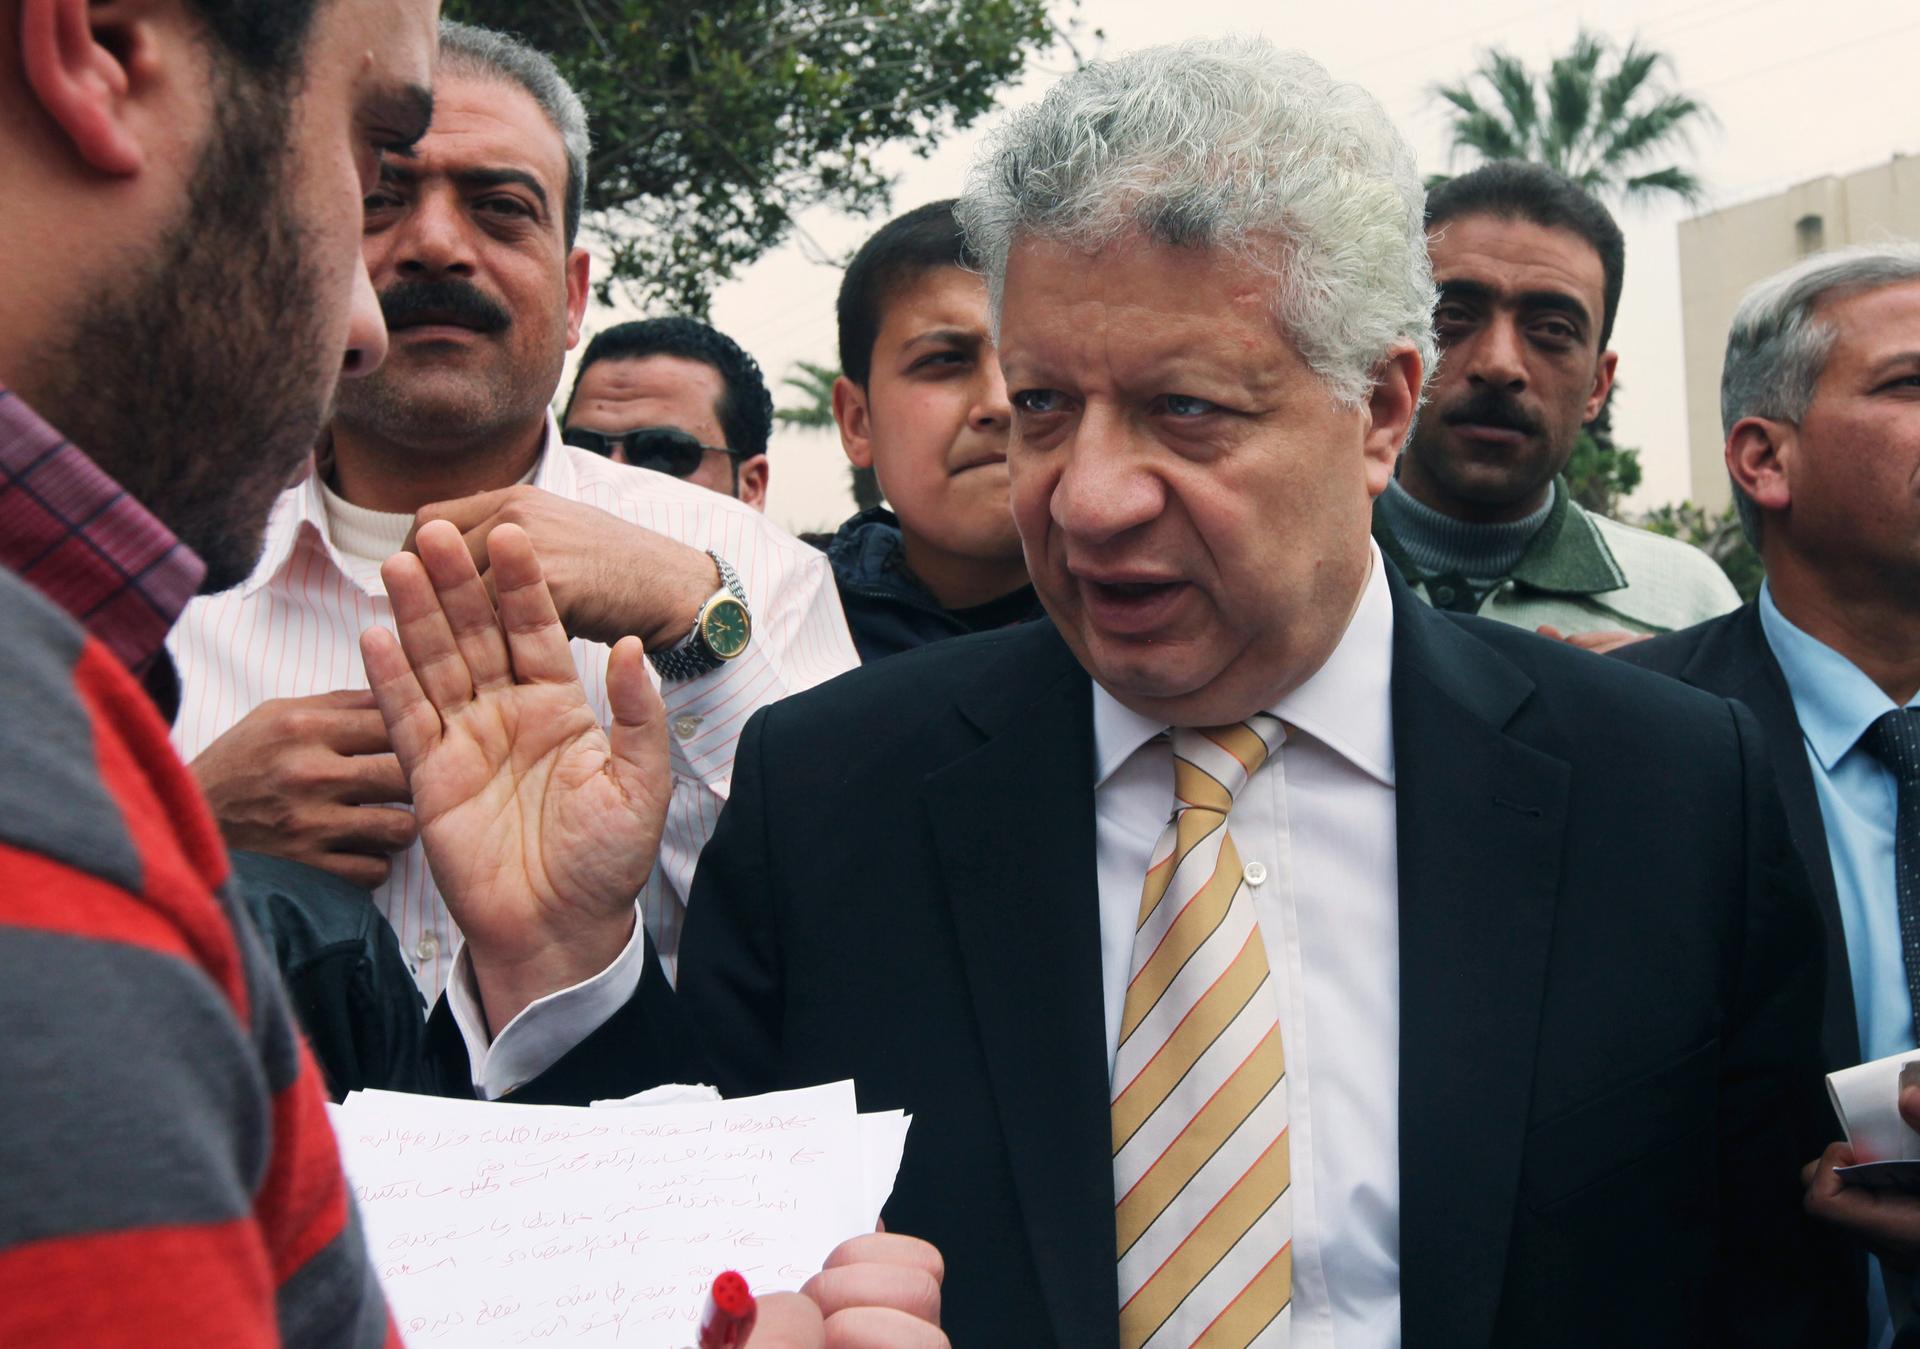 Mortada Mansour in 2012 after he announced his candidacy for Egyptian president.